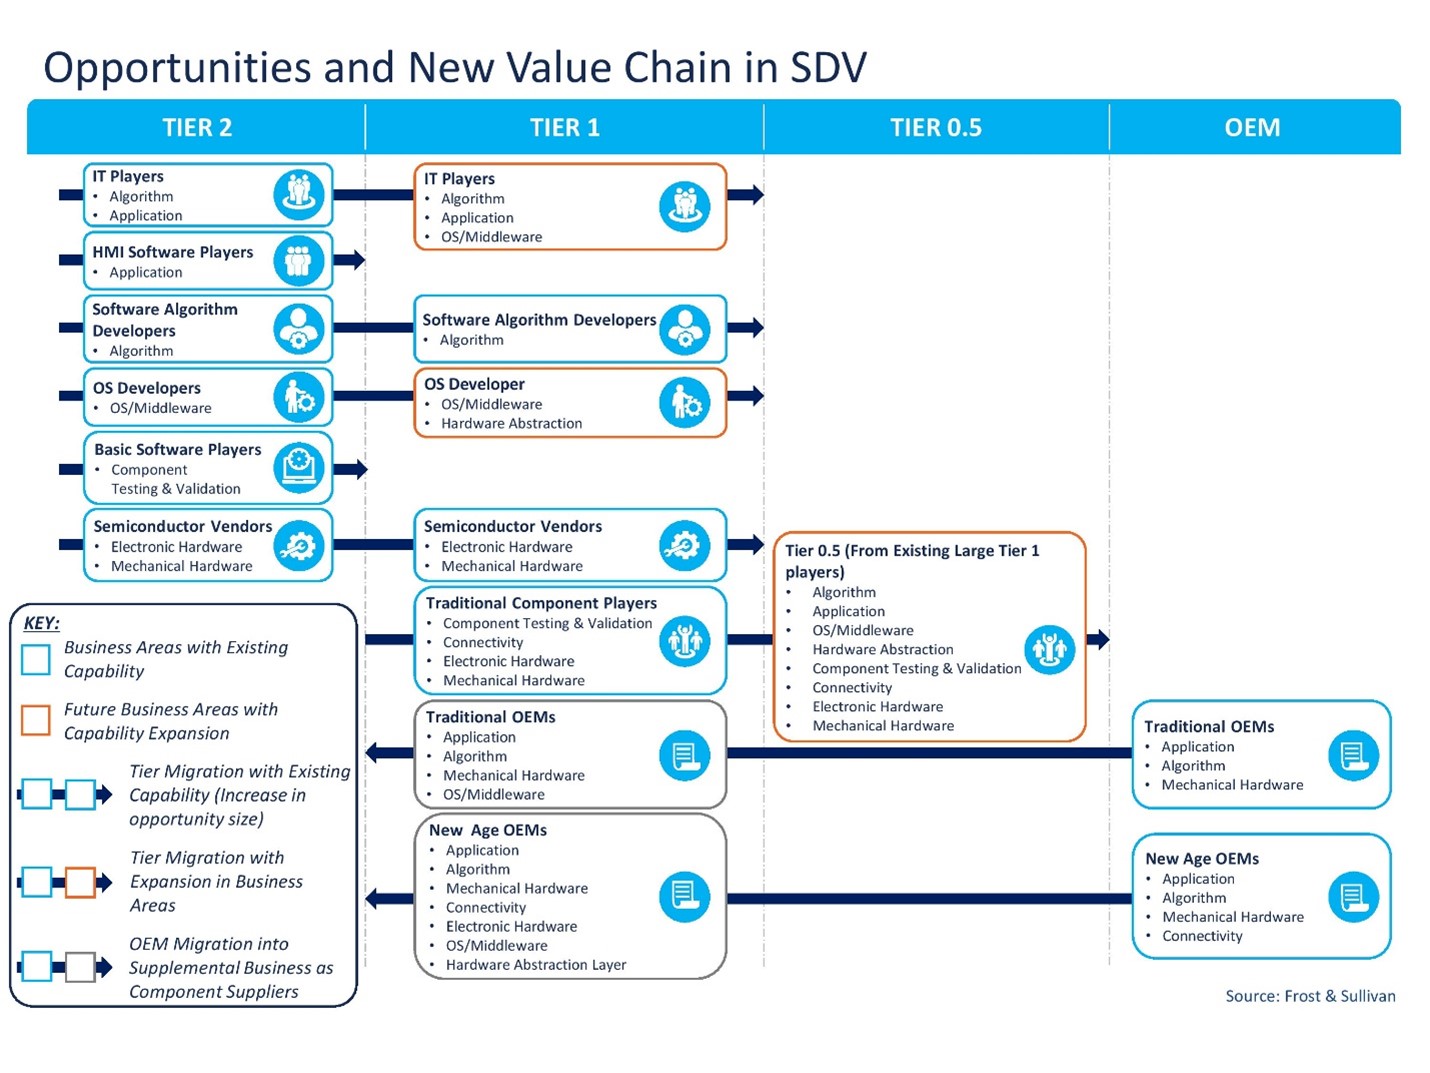 Opportunities and new value chain in SDV